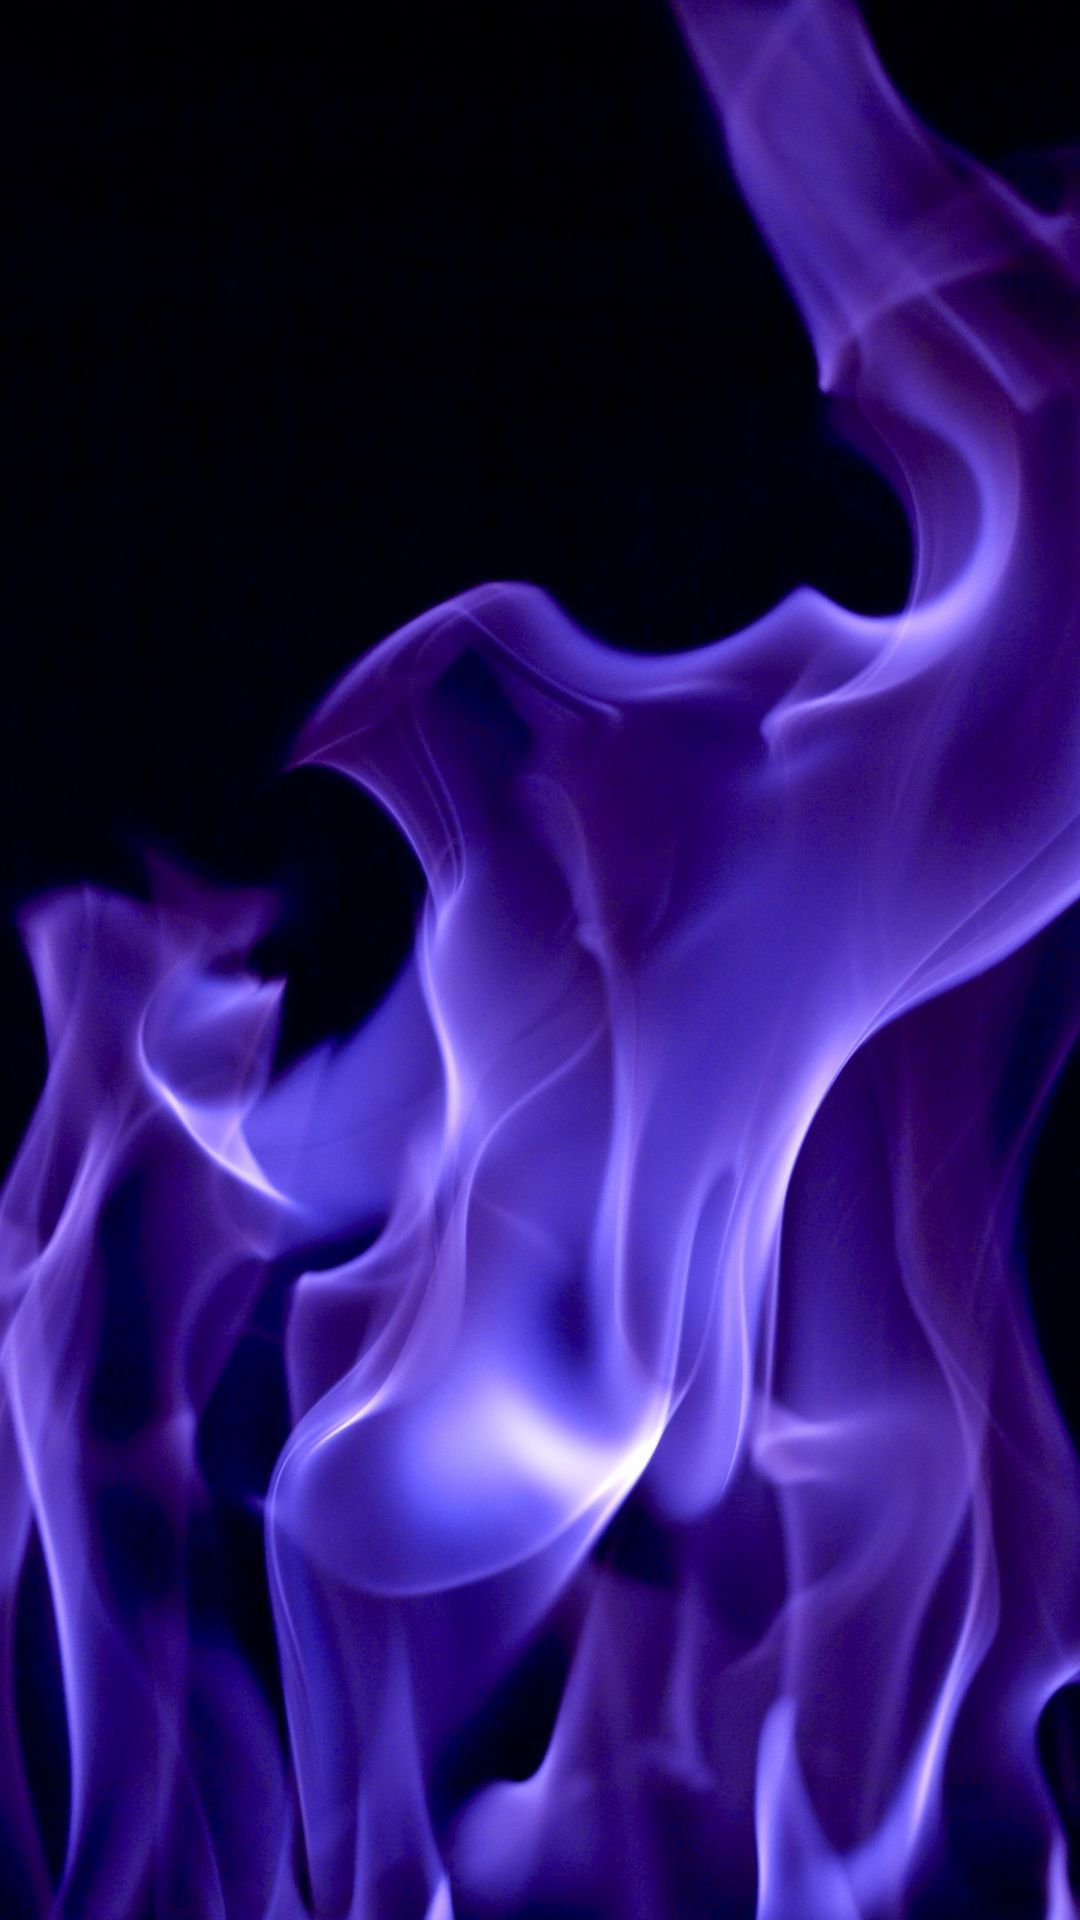 Abstract Fire Wallpaper Android Download. Dark purple wallpaper, Dark purple aesthetic, Purple aesthetic